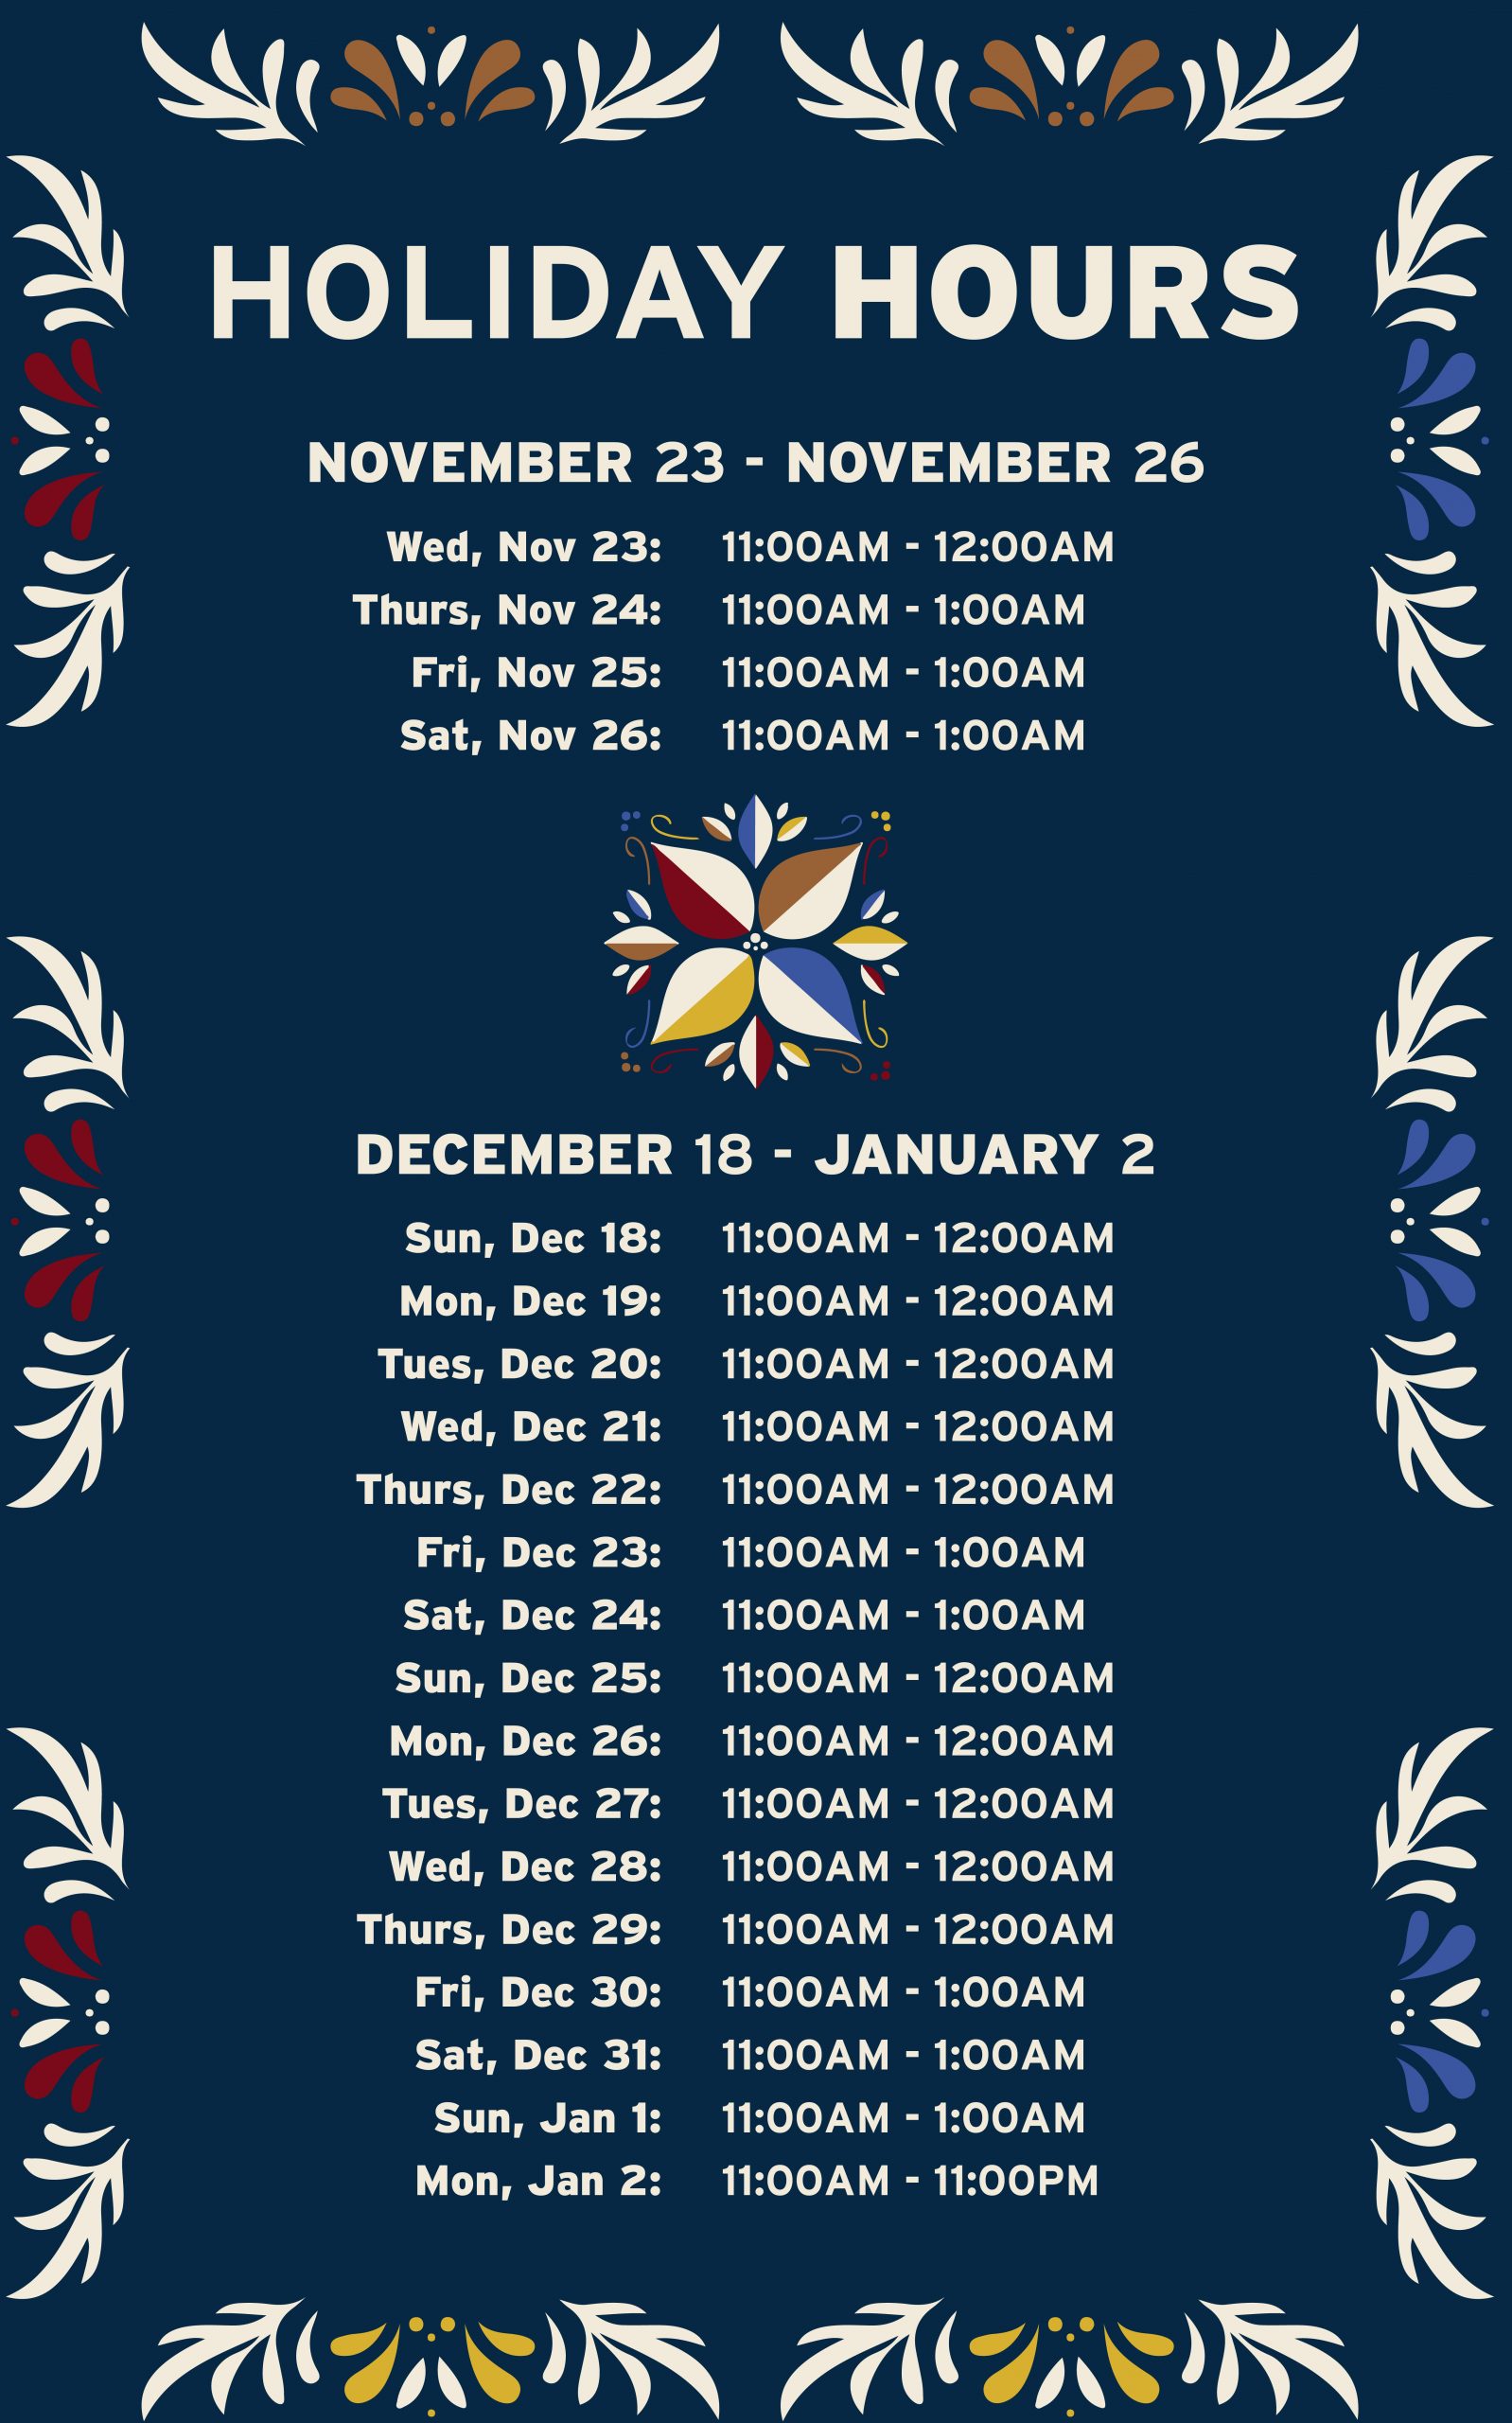 Green Valley Ranch Holiday Hours